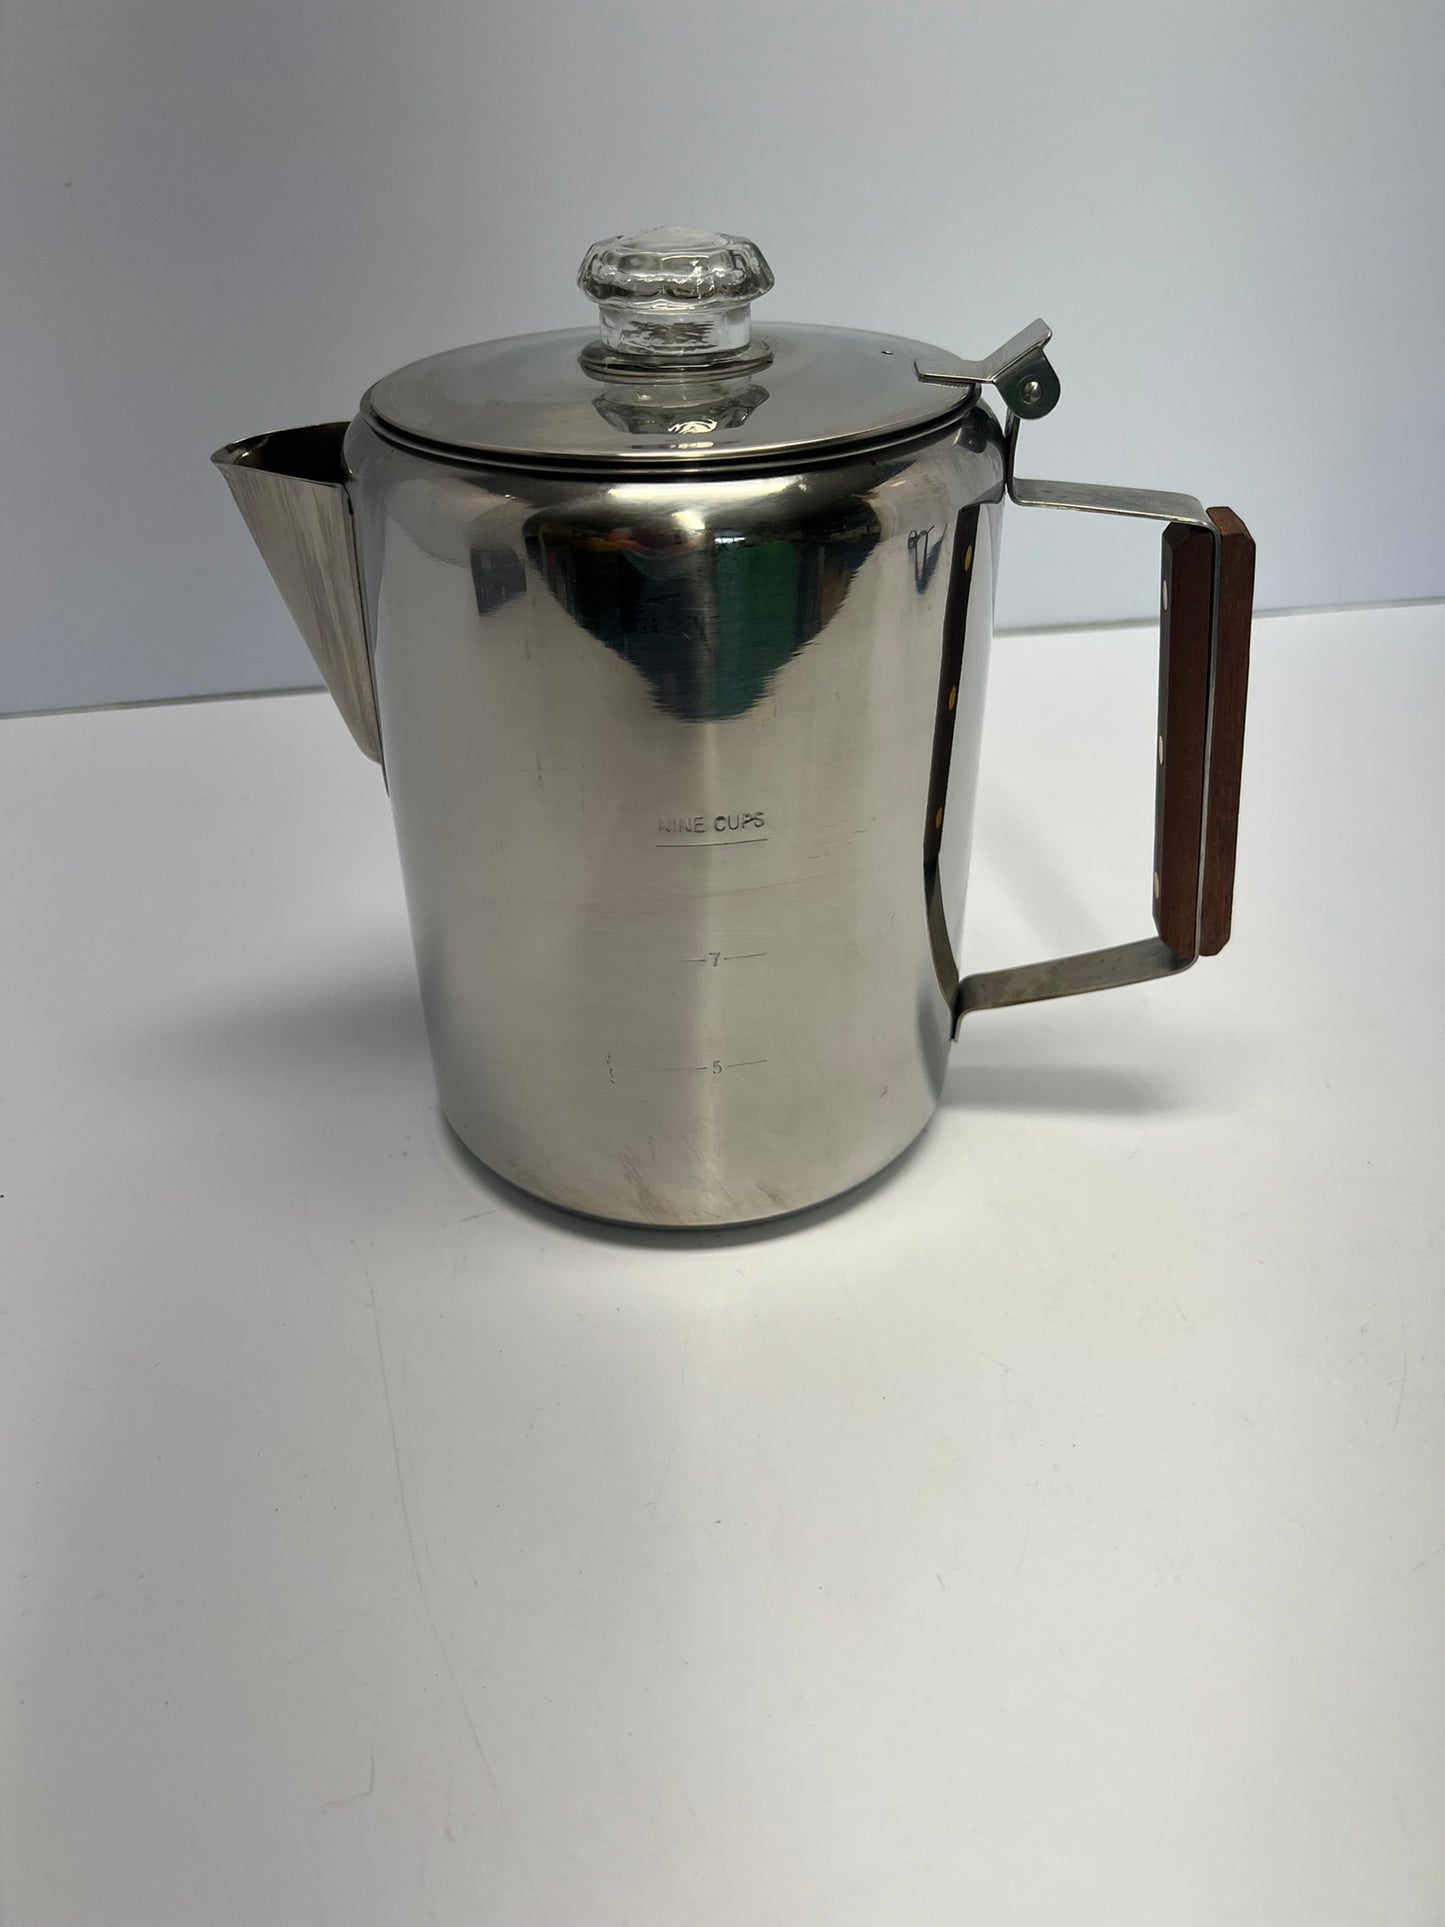 Camping Fishing Stainless 9 CUP Camping Coffee Pot Percolator for Campfire or Stovetop Like New